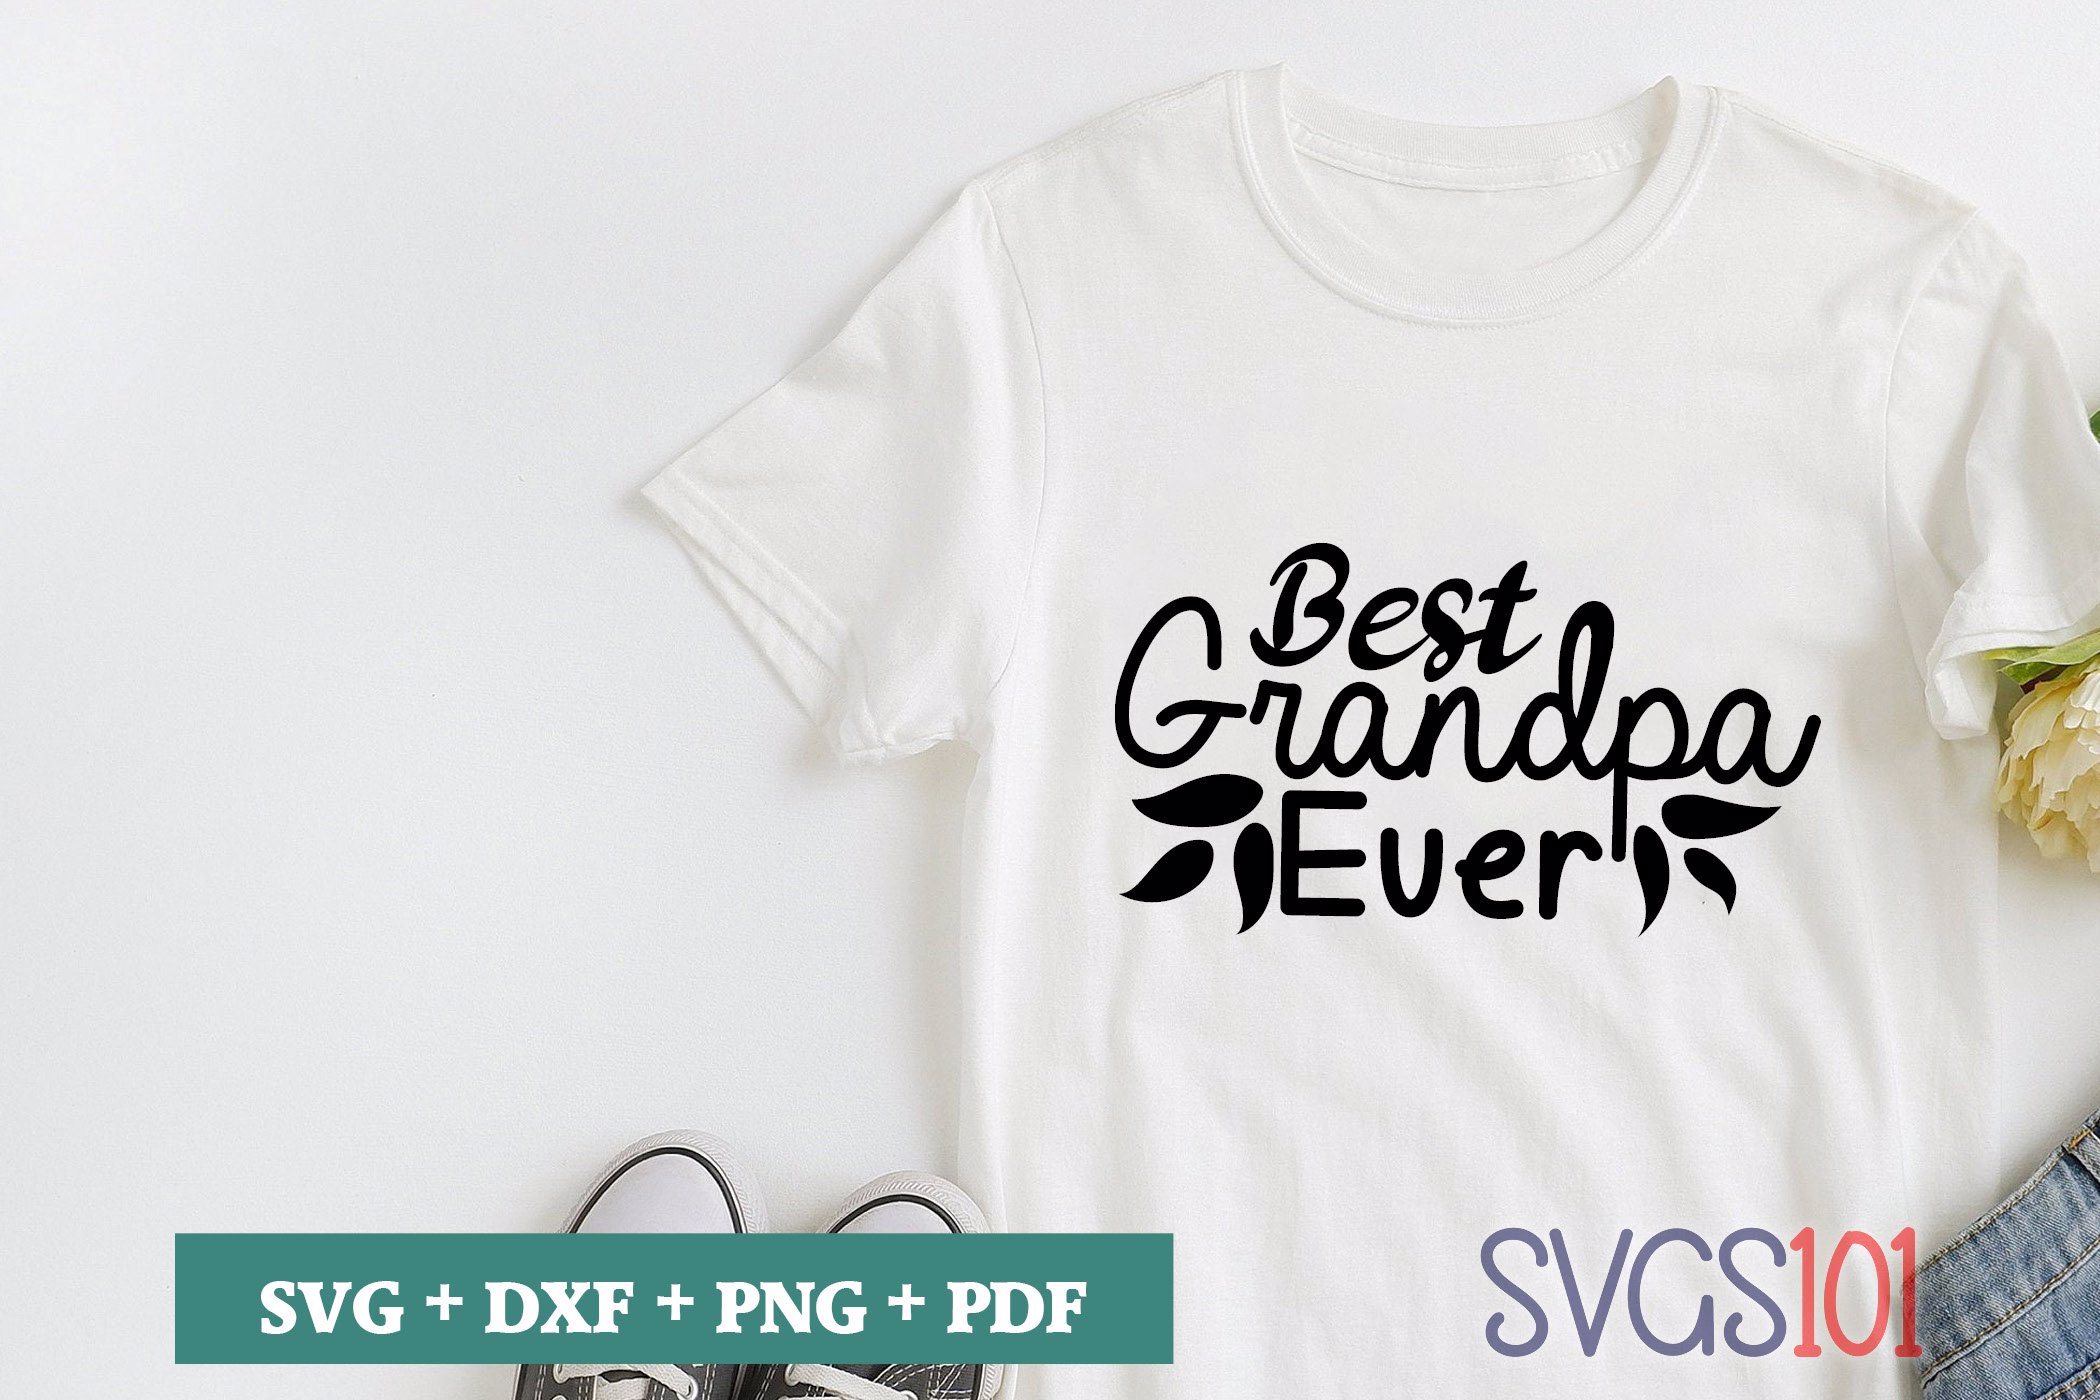 Download Best grandpa ever SVG Cuttable file - DXF, EPS, PNG, PDF ...